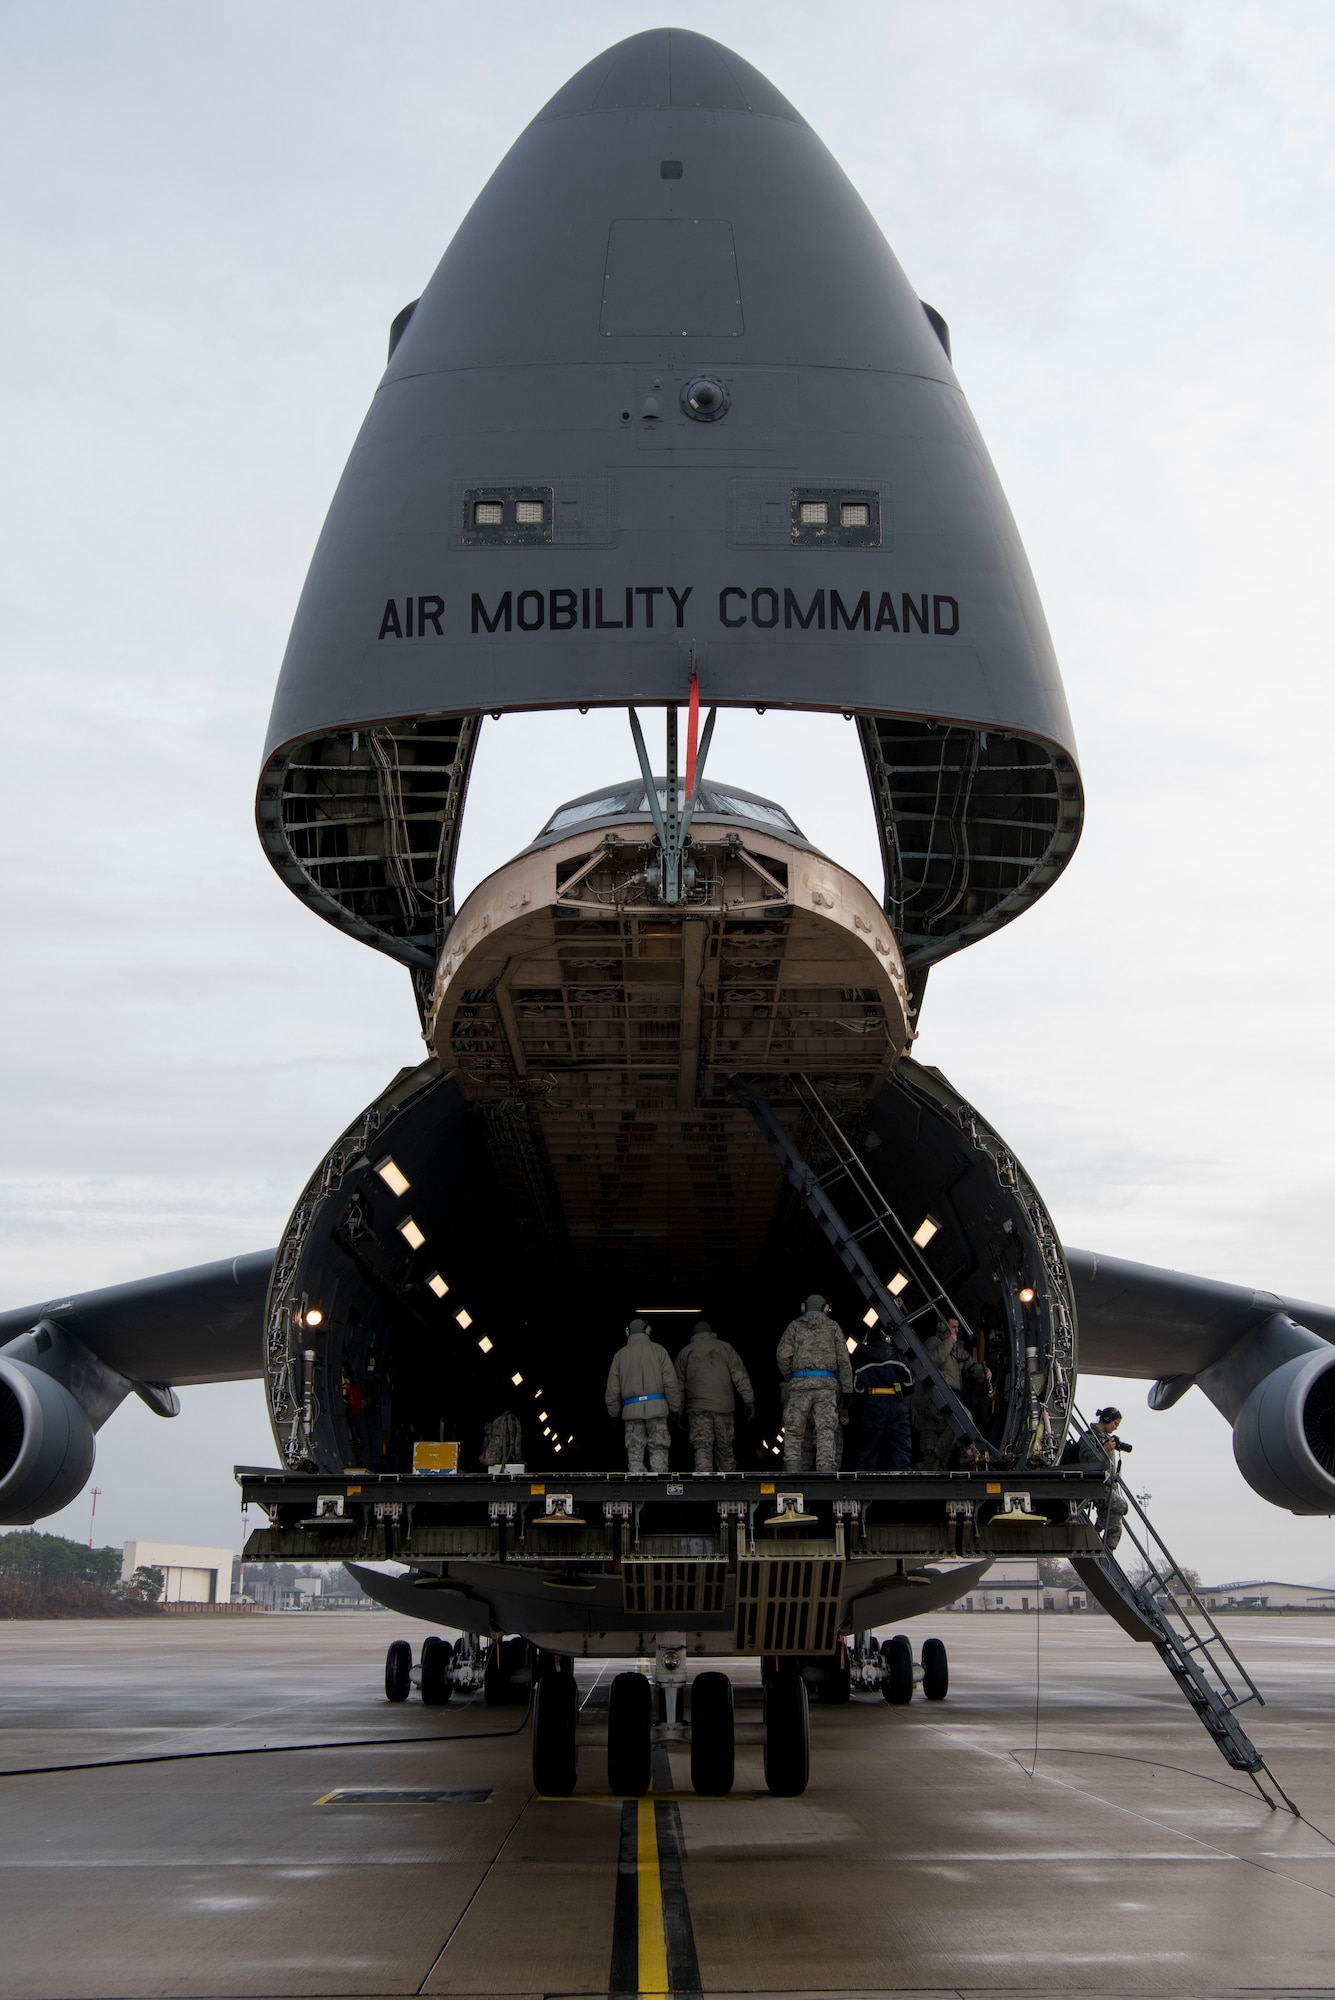 Airmen assigned to the 521st Air Mobility Operations Wing headquartered at Ramstein Air Base, Germany, learn how to operate and maintain a ramp aboard a C-5M Super Galaxy aircraft at Ramstein AB, Nov. 29, 2018. The 521st AMOW has more than 2,100 personnel spread out across nearly 20 geographically separated units throughout Europe and the Middle East. (U.S. Air Force photo by Staff Sgt. Aaron J. Jenne)